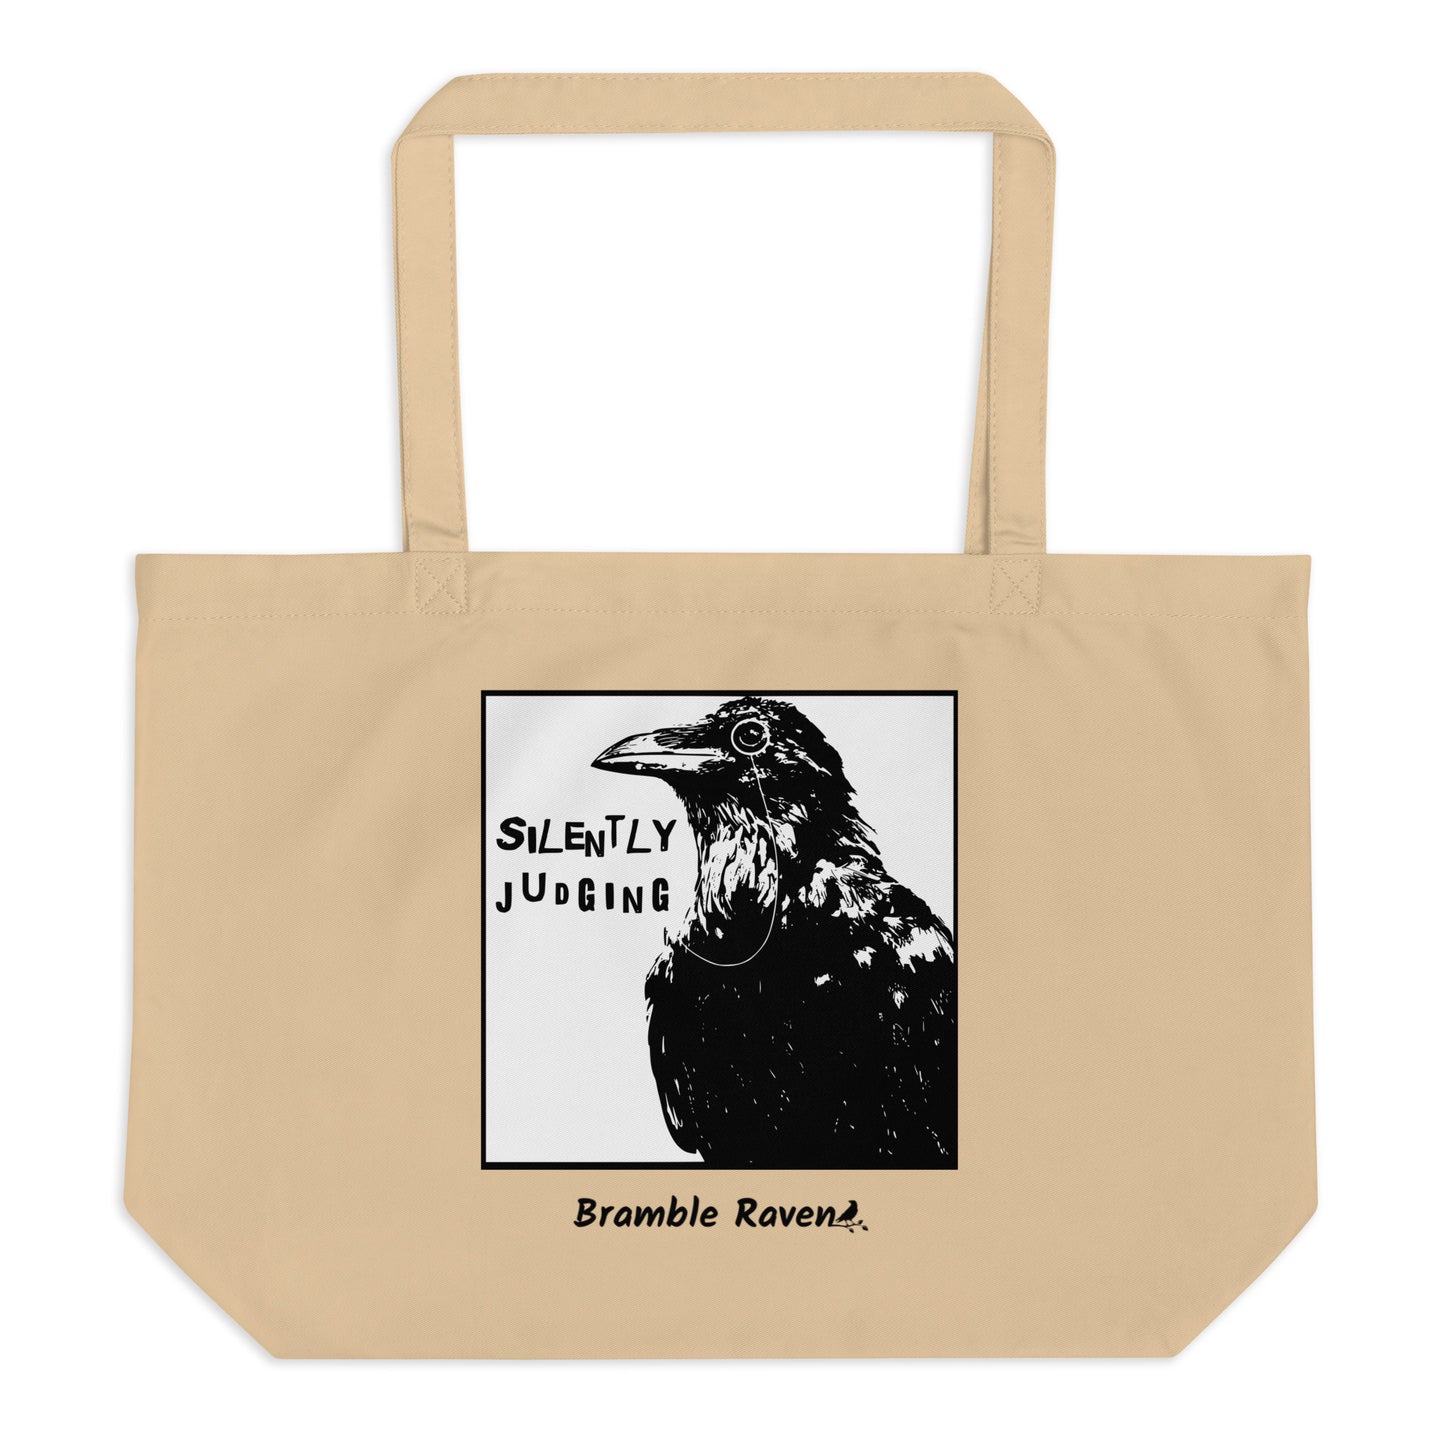 Original Silently Judging crow design. Silently Judging text. Black crow with monocle in square frame. Printed on large oyster-colored eco tote. 20 by 14 by 5 inches. 100% recycled cotton.